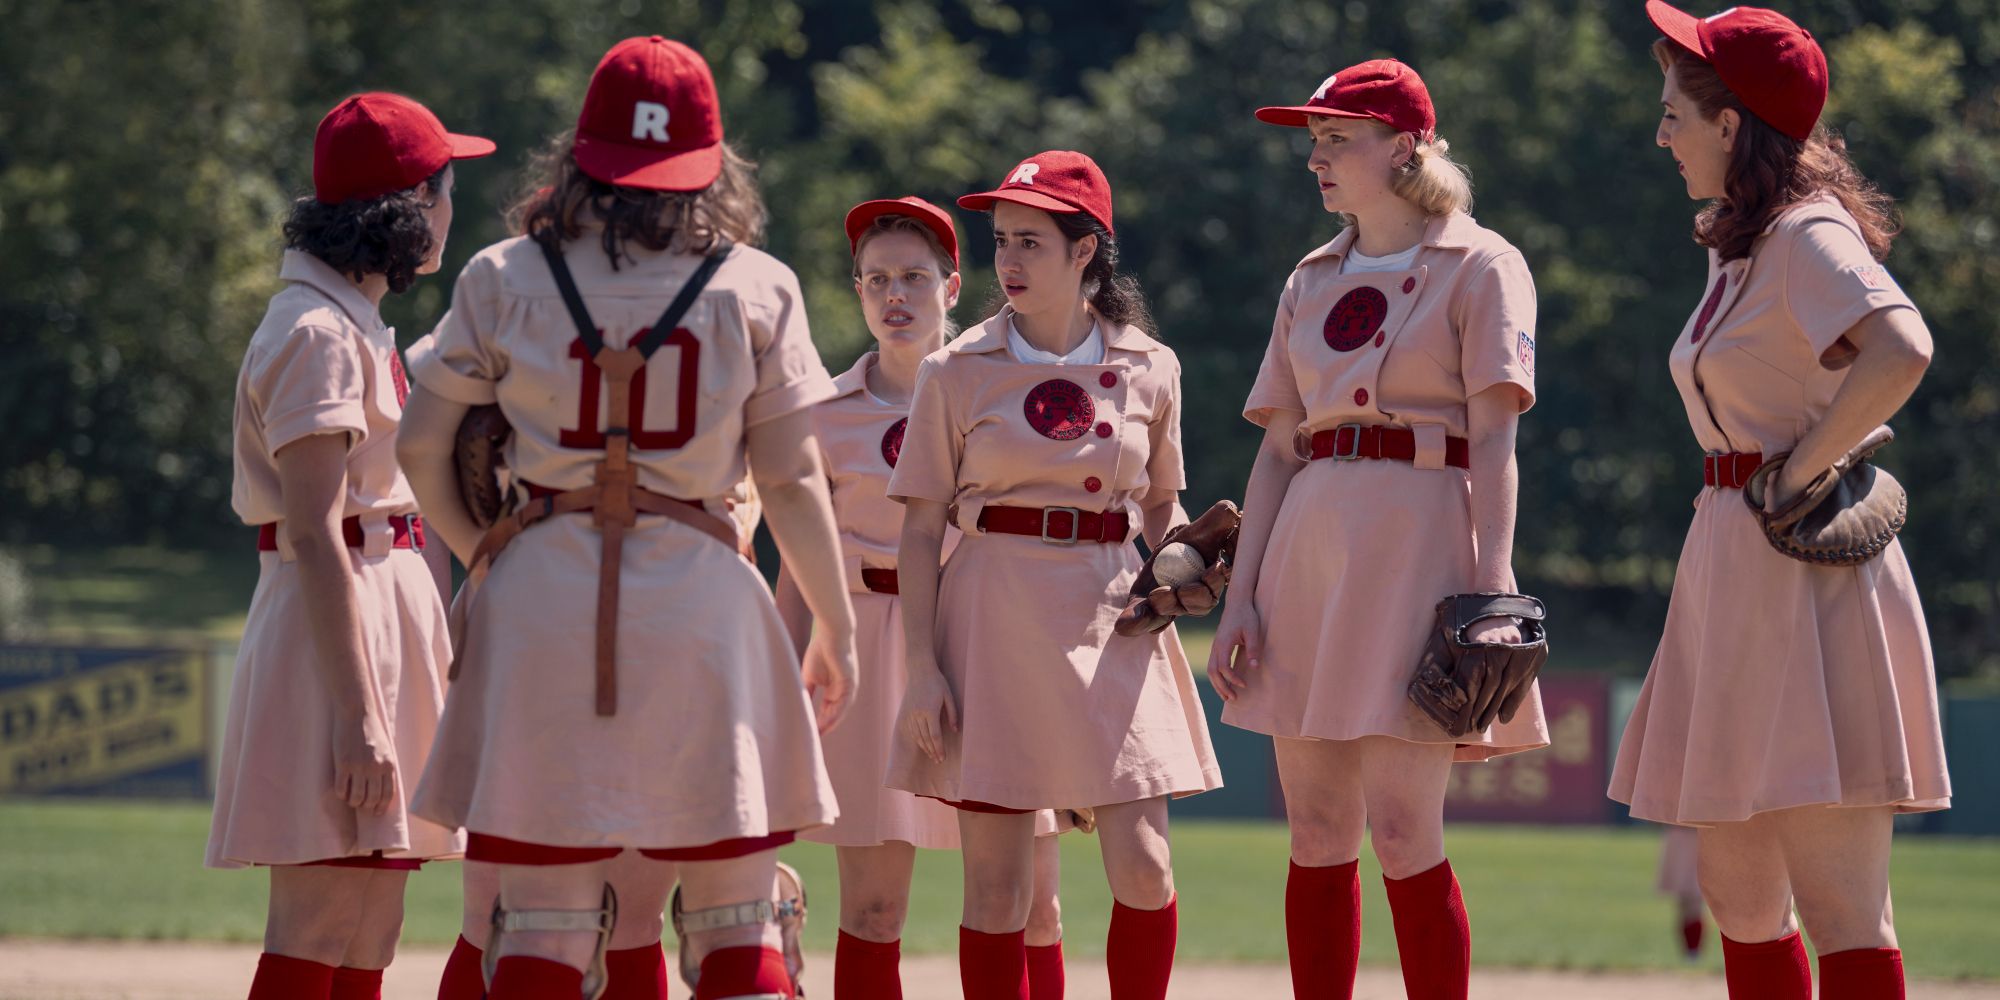 the rockford peaches together in A League of Their Own